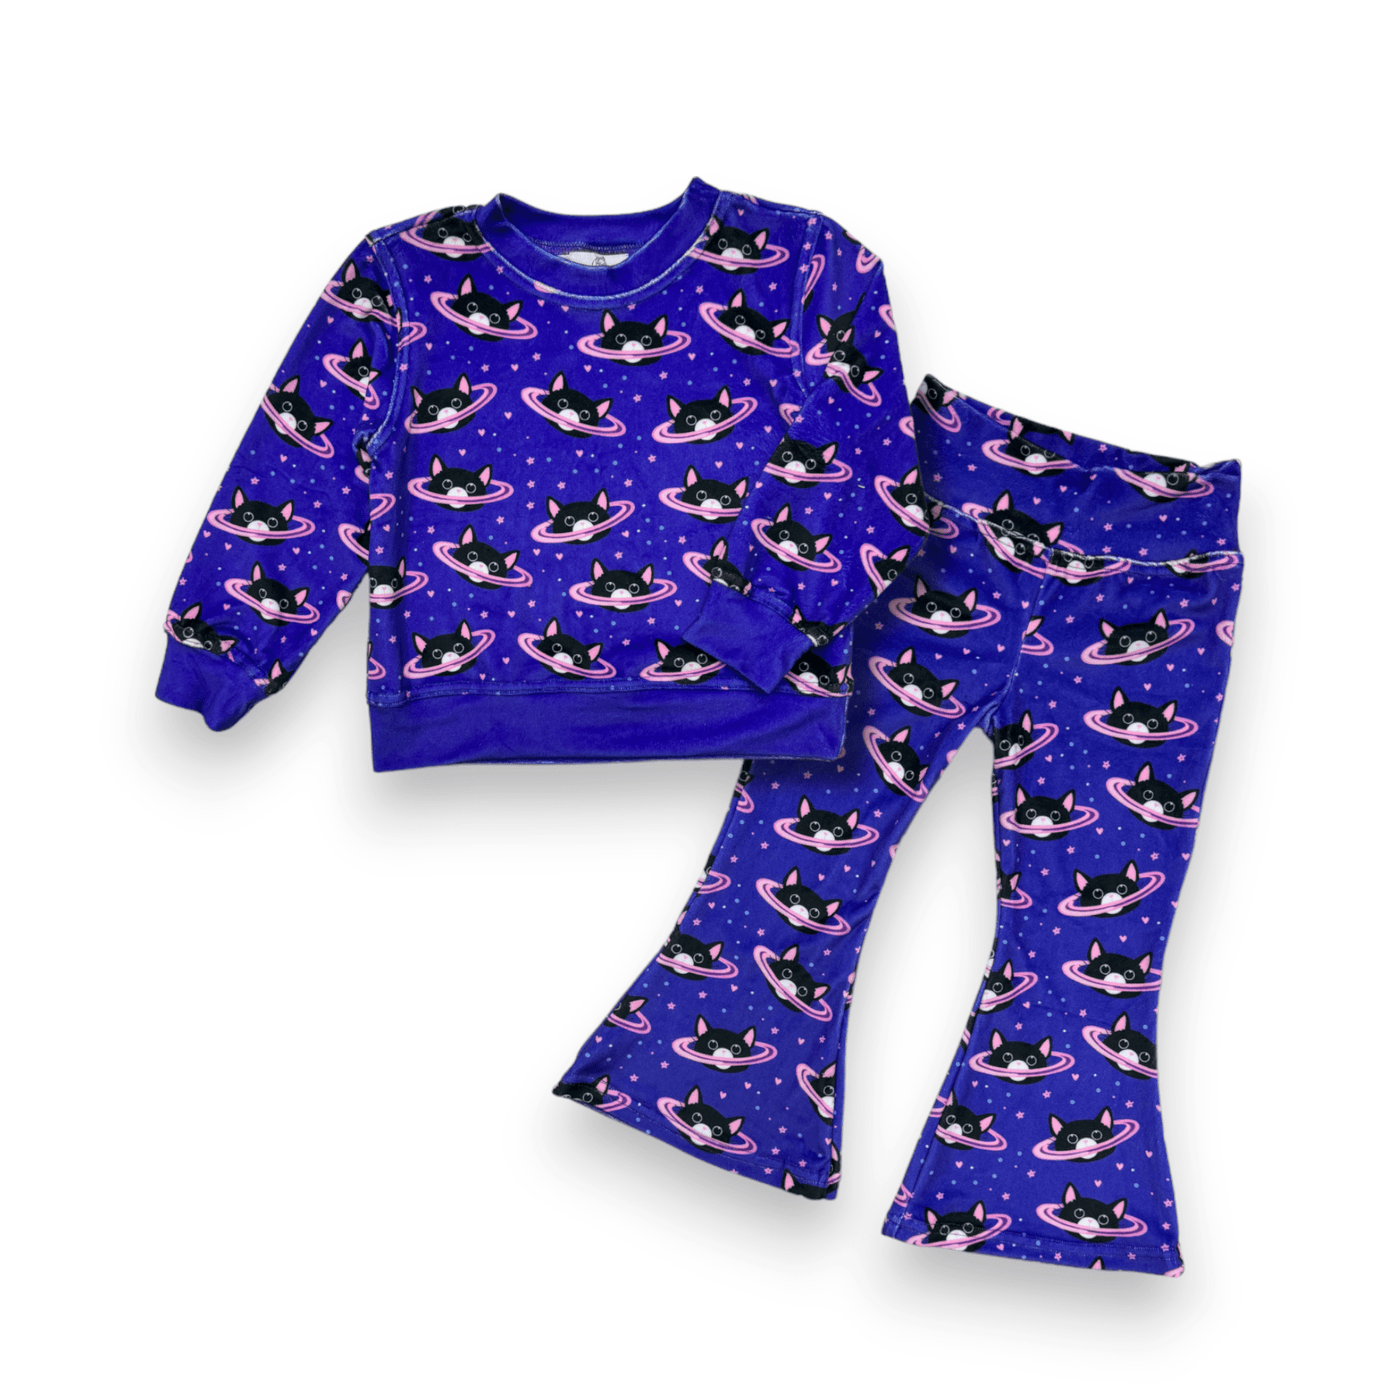 Best Day Ever Kids Baby & Toddler Outfits Retro Velvet Set - Space Cats buy online boutique kids clothing